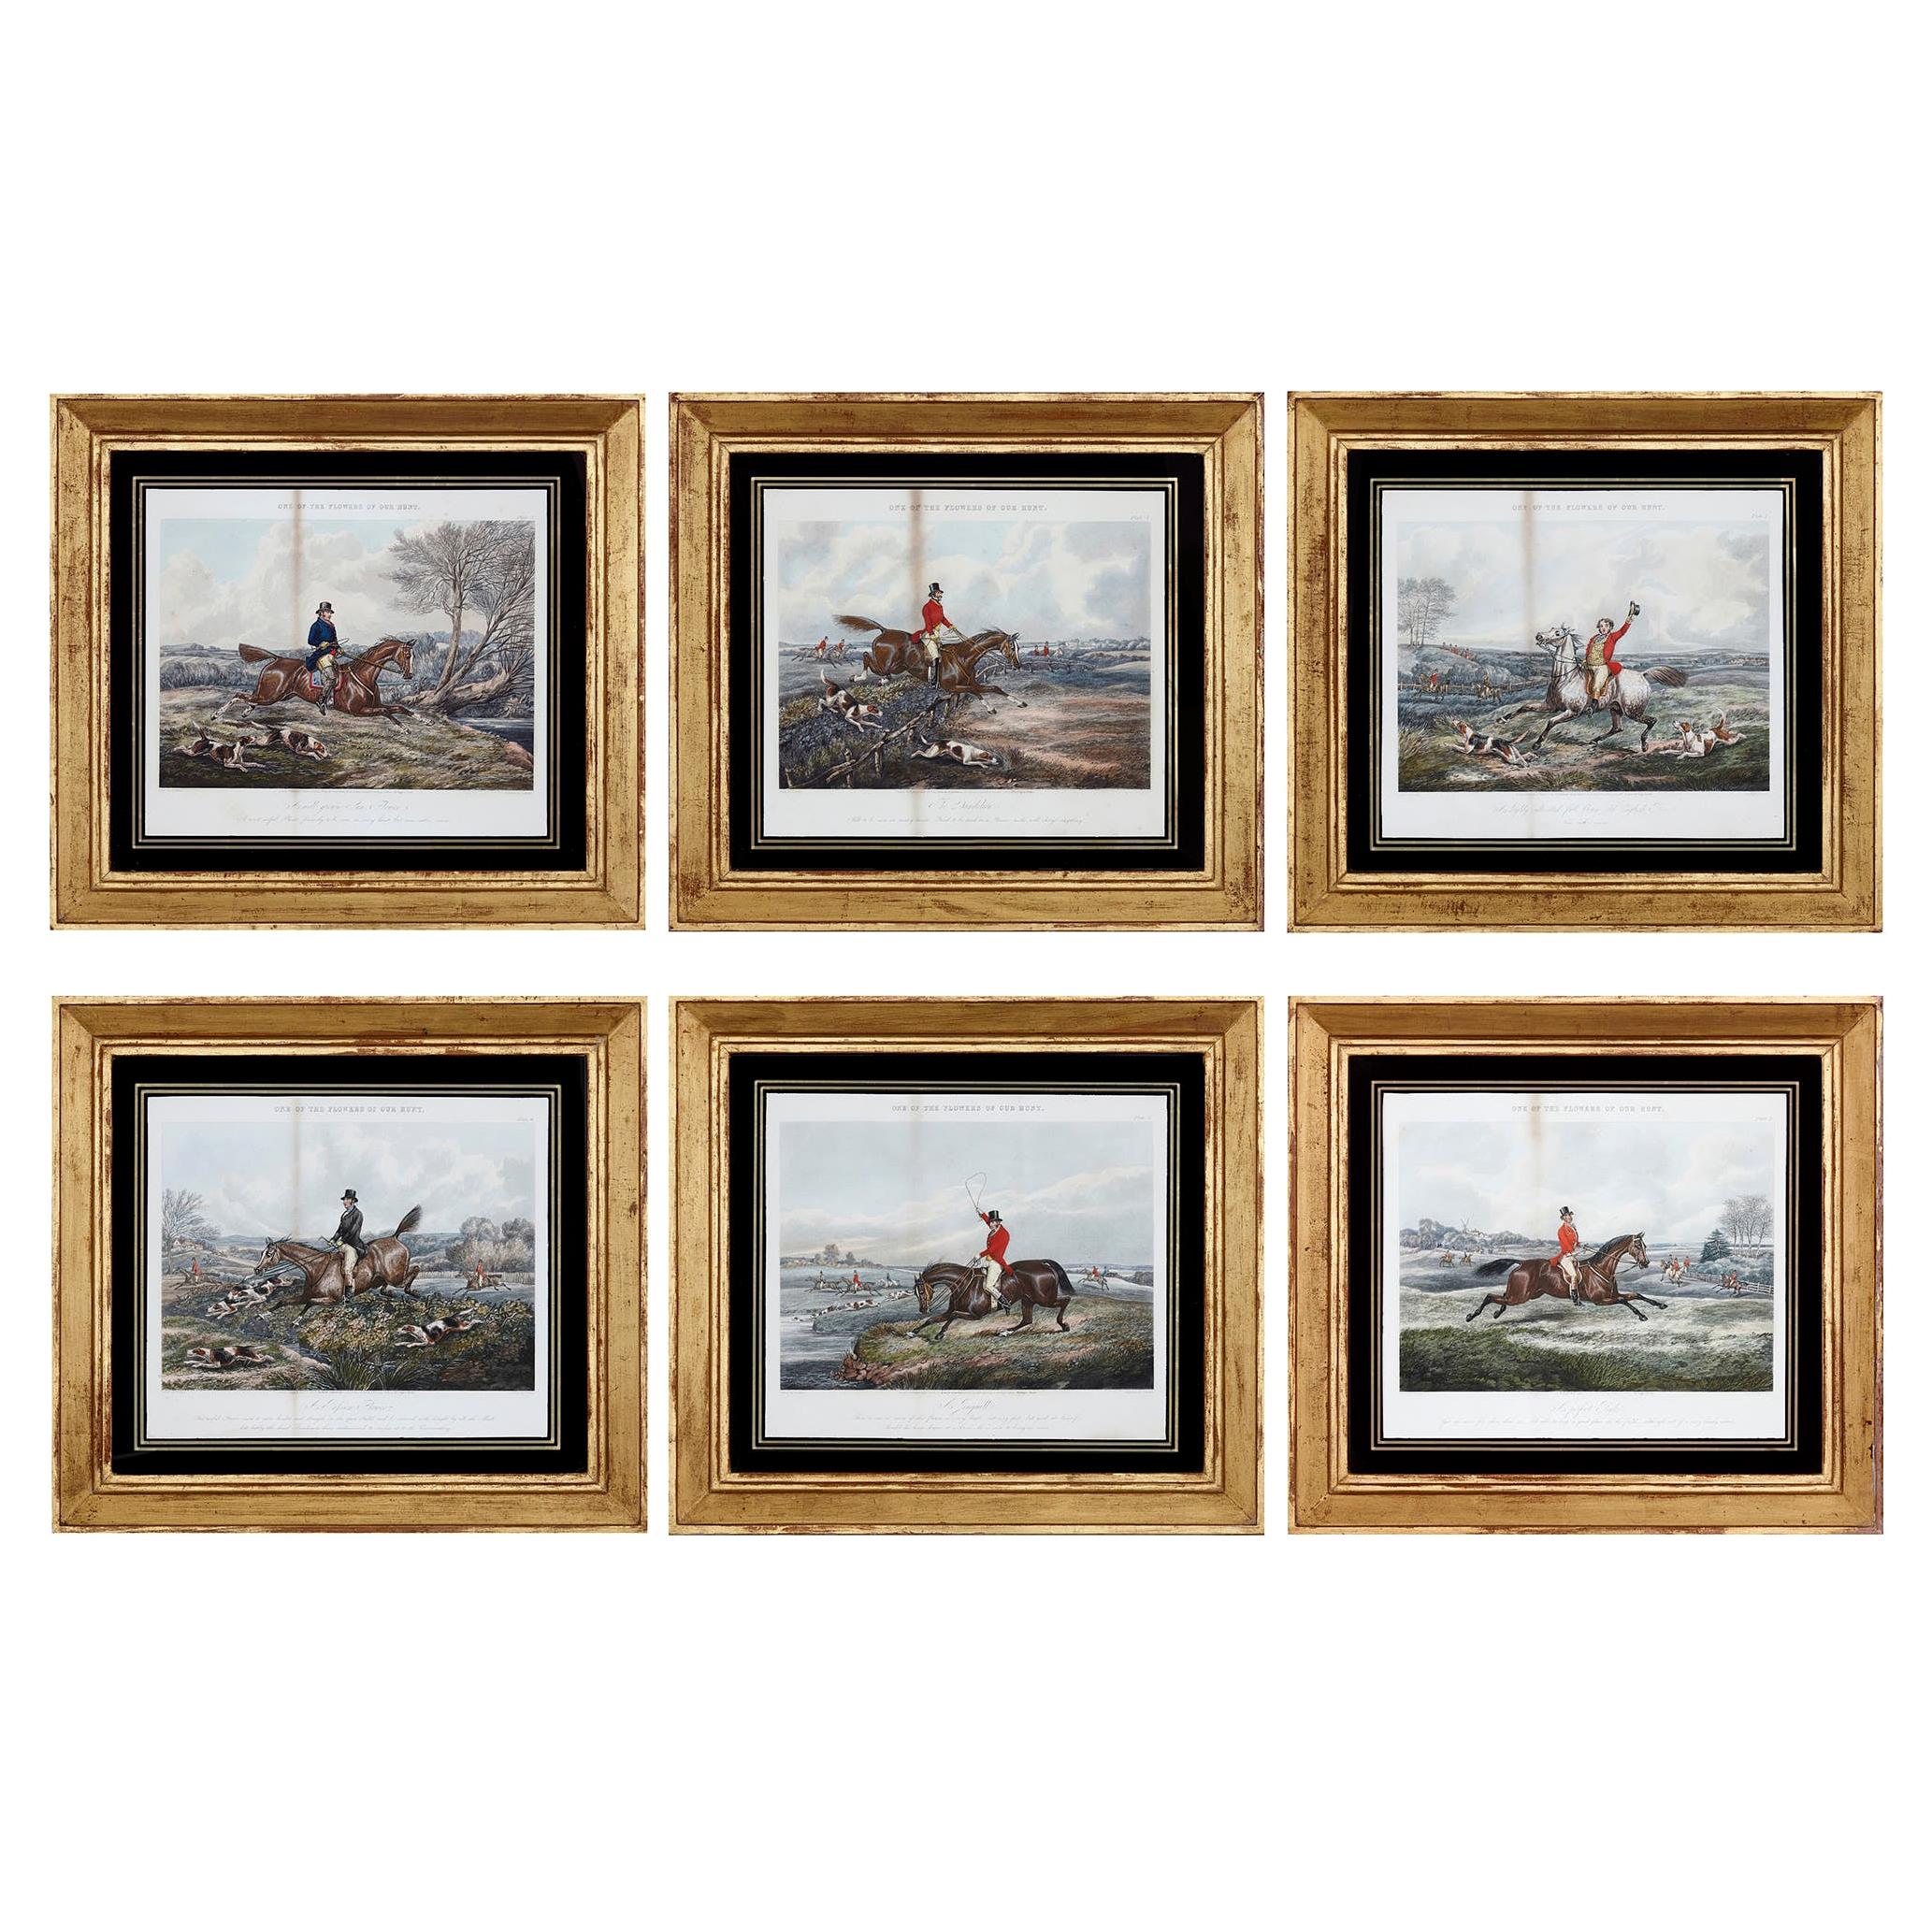 Set of Six Framed Prints Published by Rudolph Ackermann